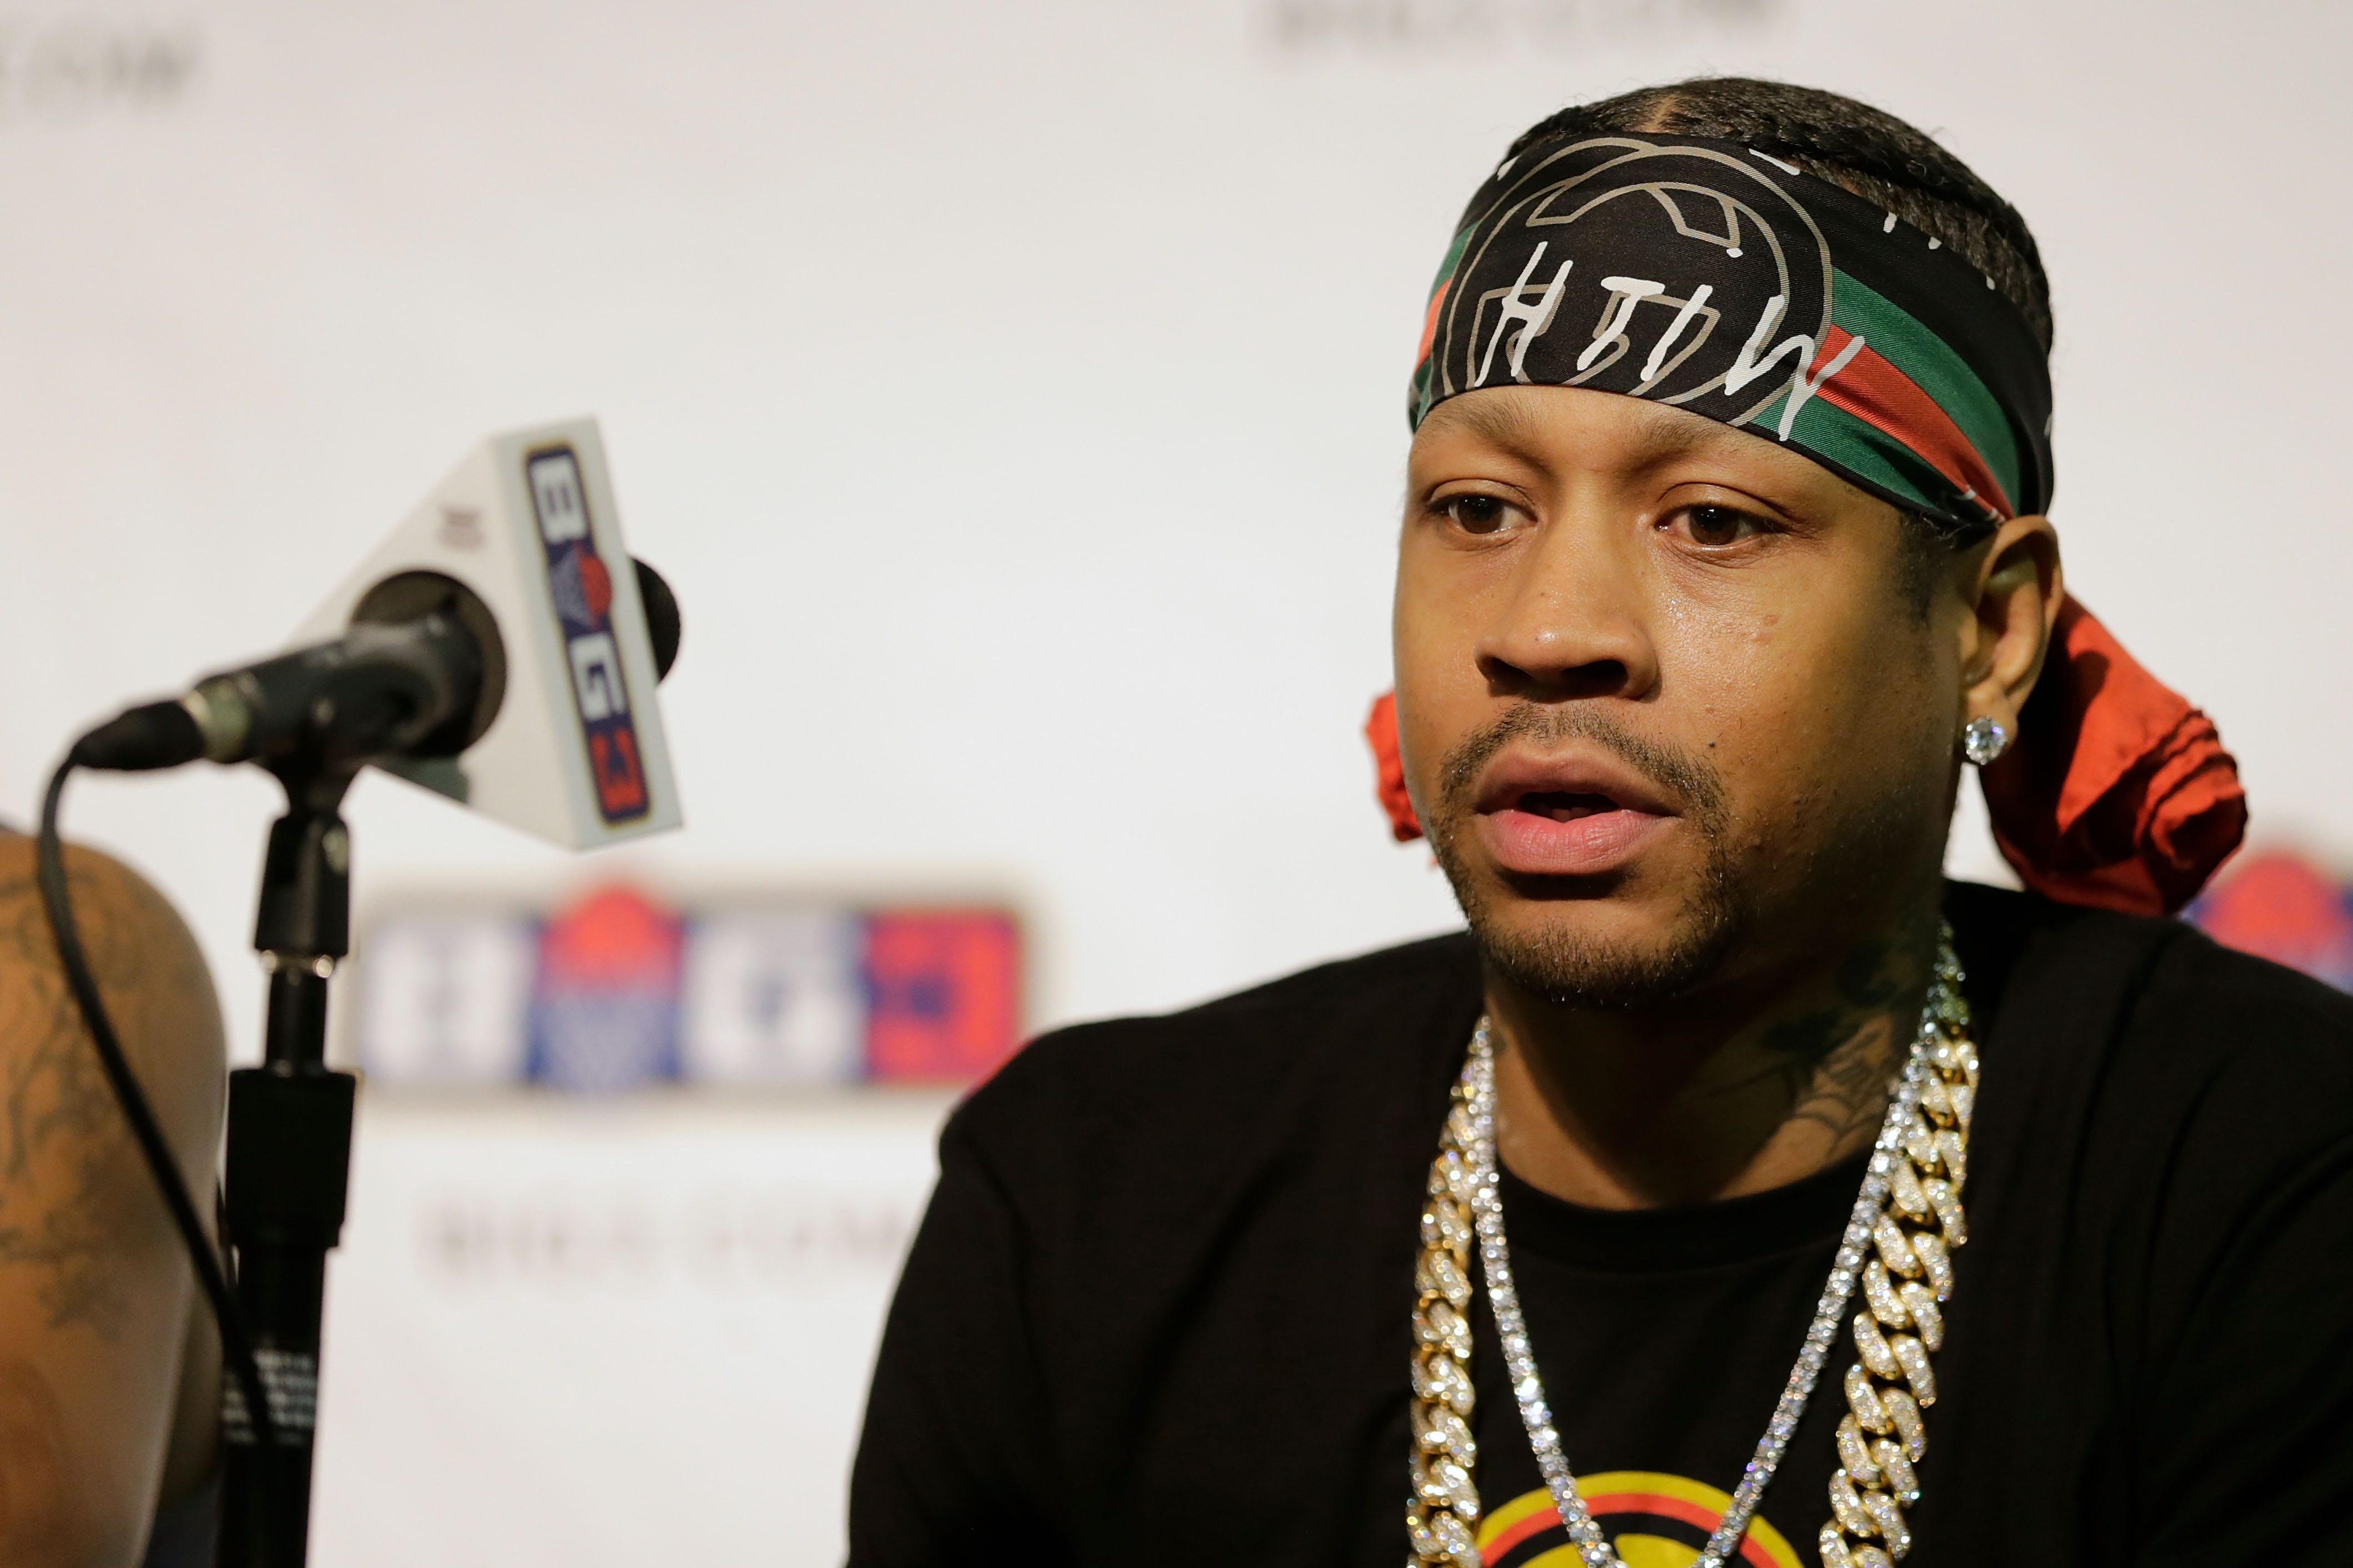 The little-known story behind Allen Iverson's 'practice' rant - ESPN